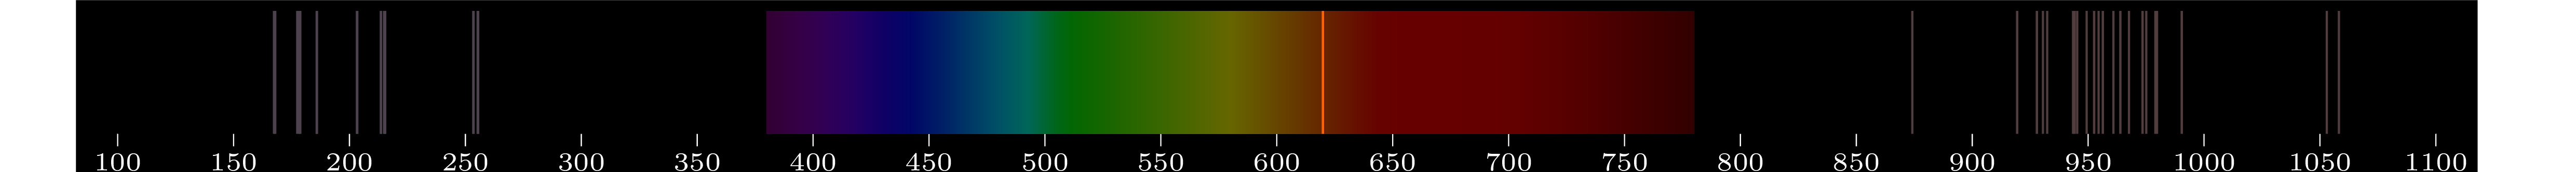 emmision spectra of element P